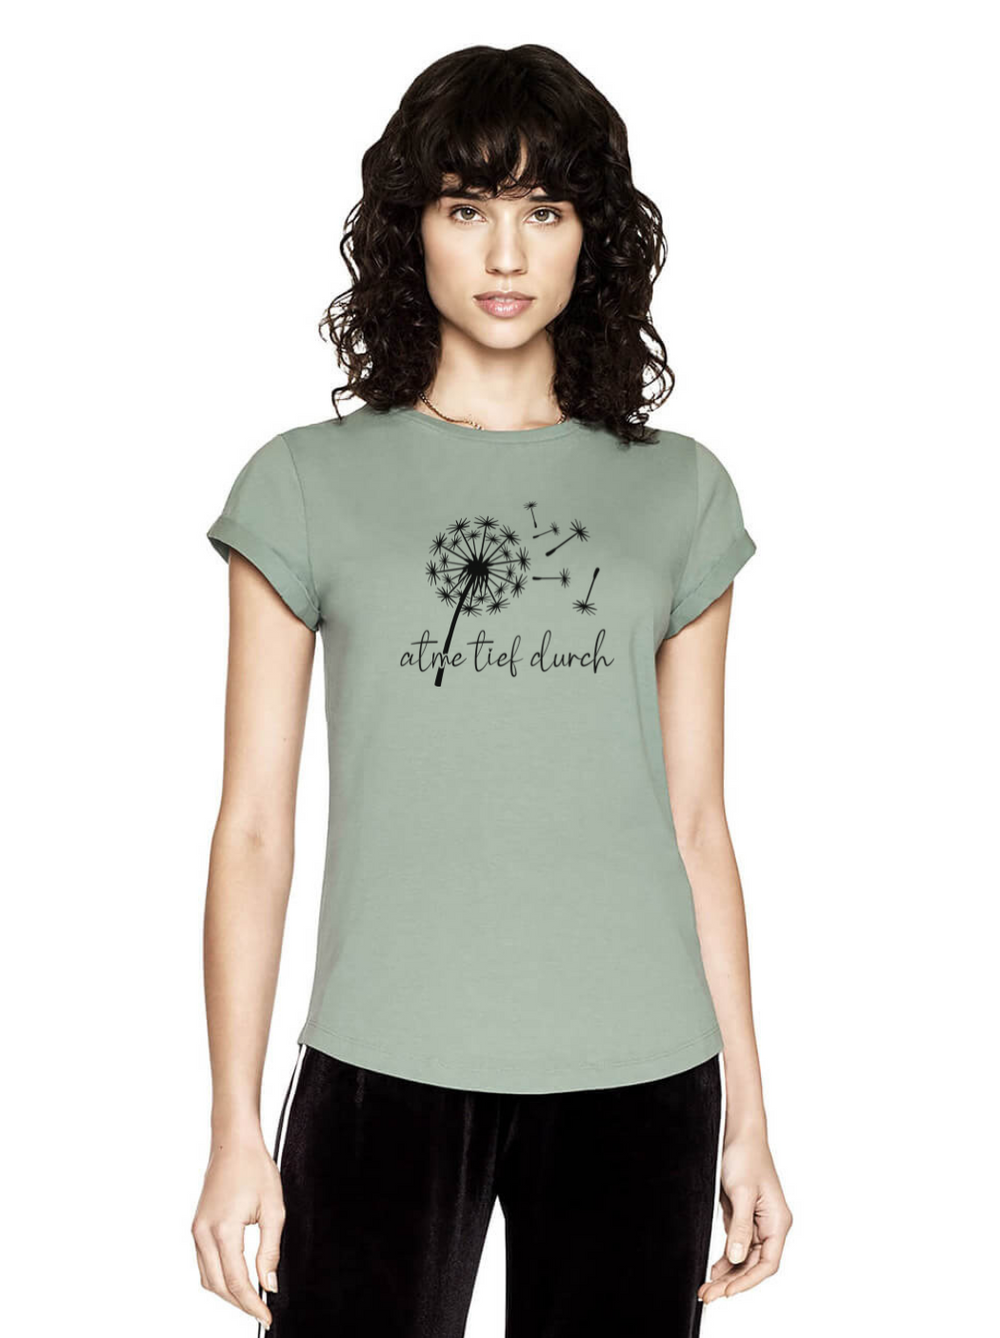 Atme tief durch Damen T-Shirt rolled arms Model